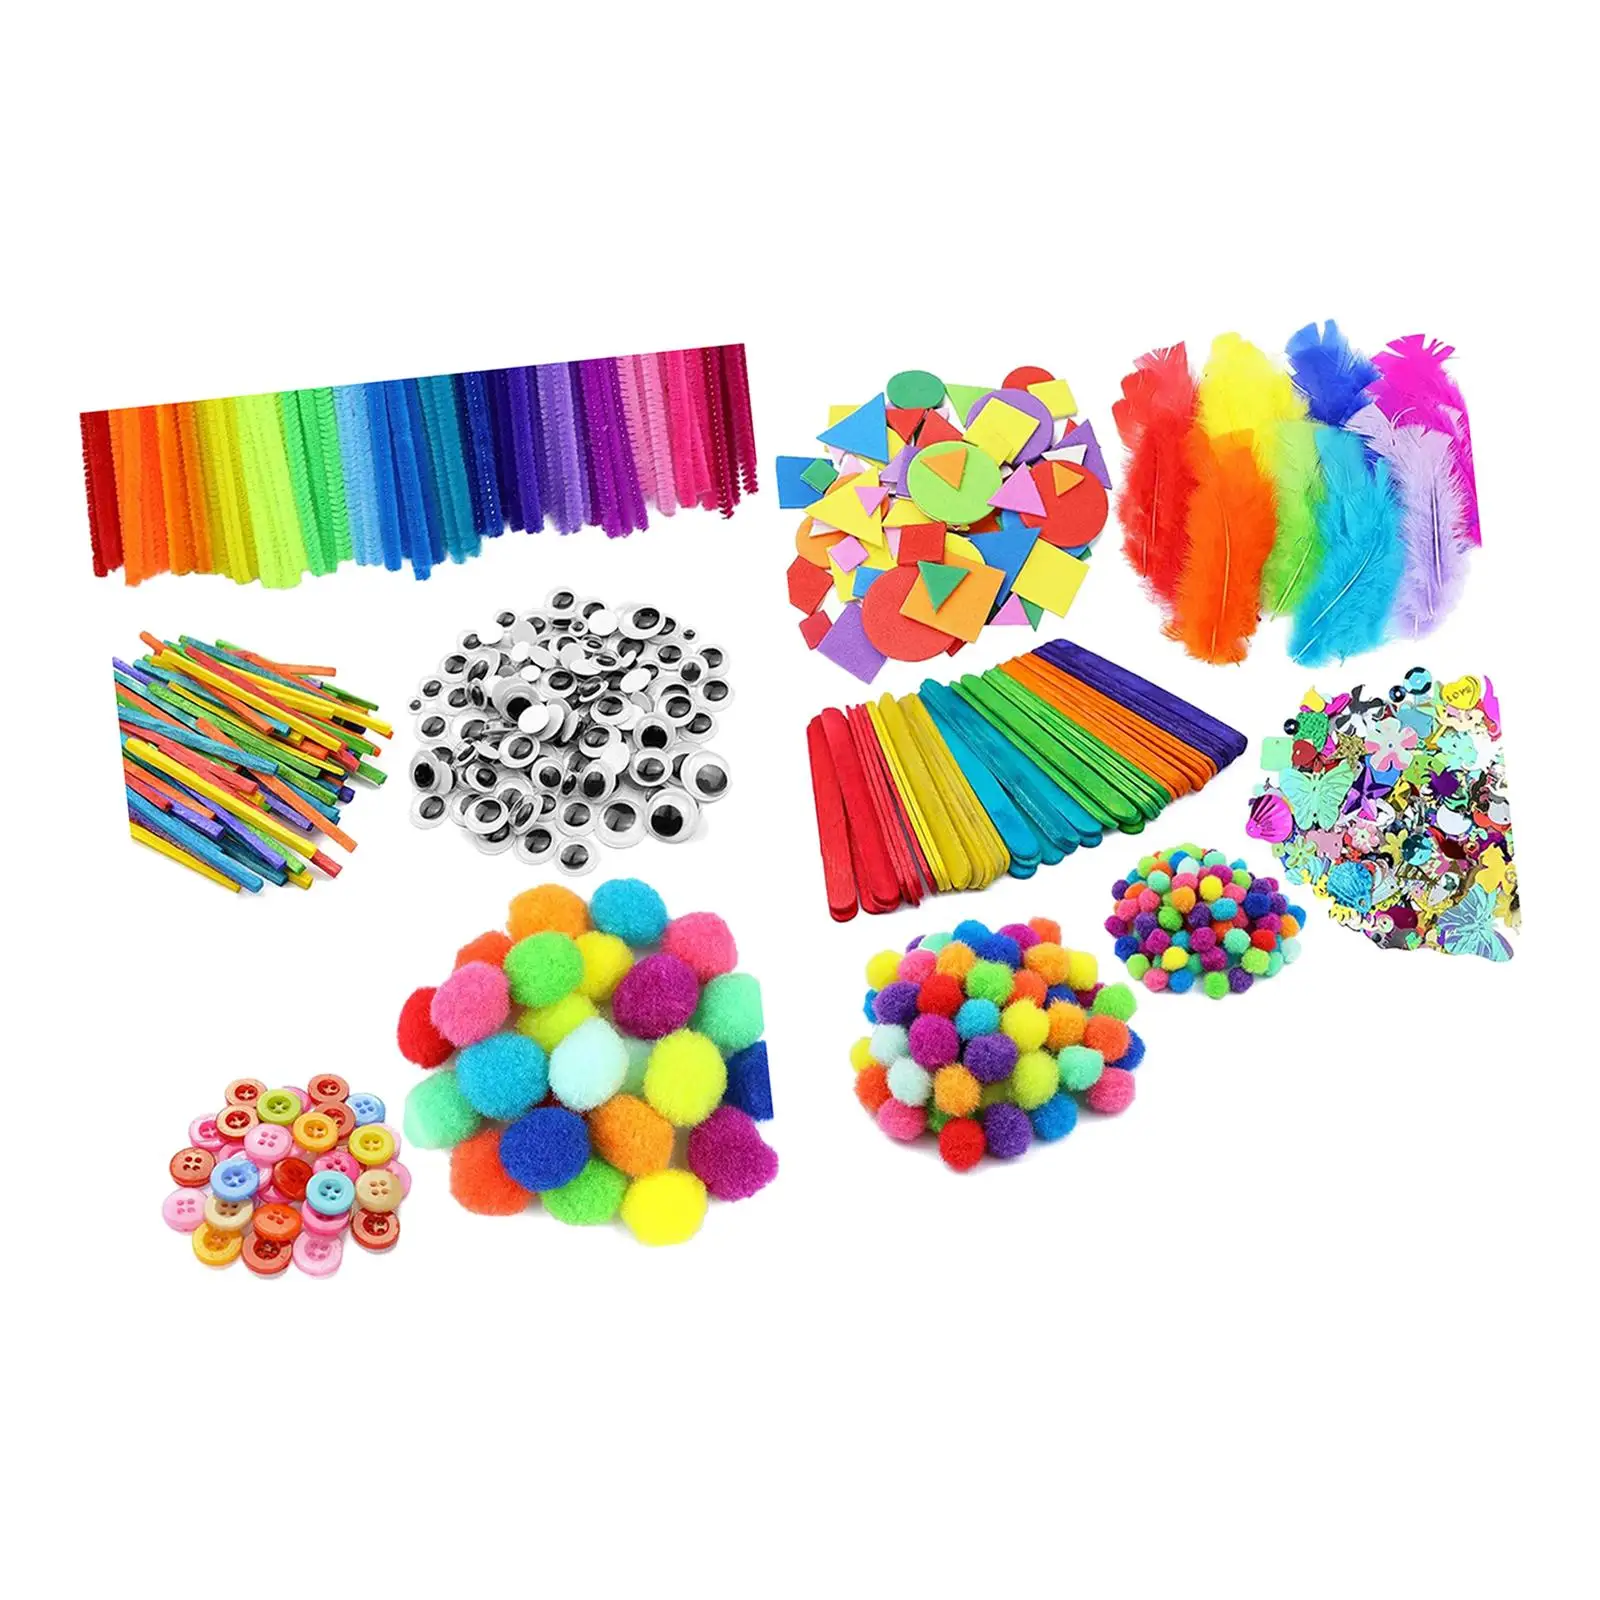 

1000 Pieces Crafts for Kids Ages 4-8 Age 4-6, 8-12 Toddlers Craft Materials Set for School Party Favors Home Crafting Project